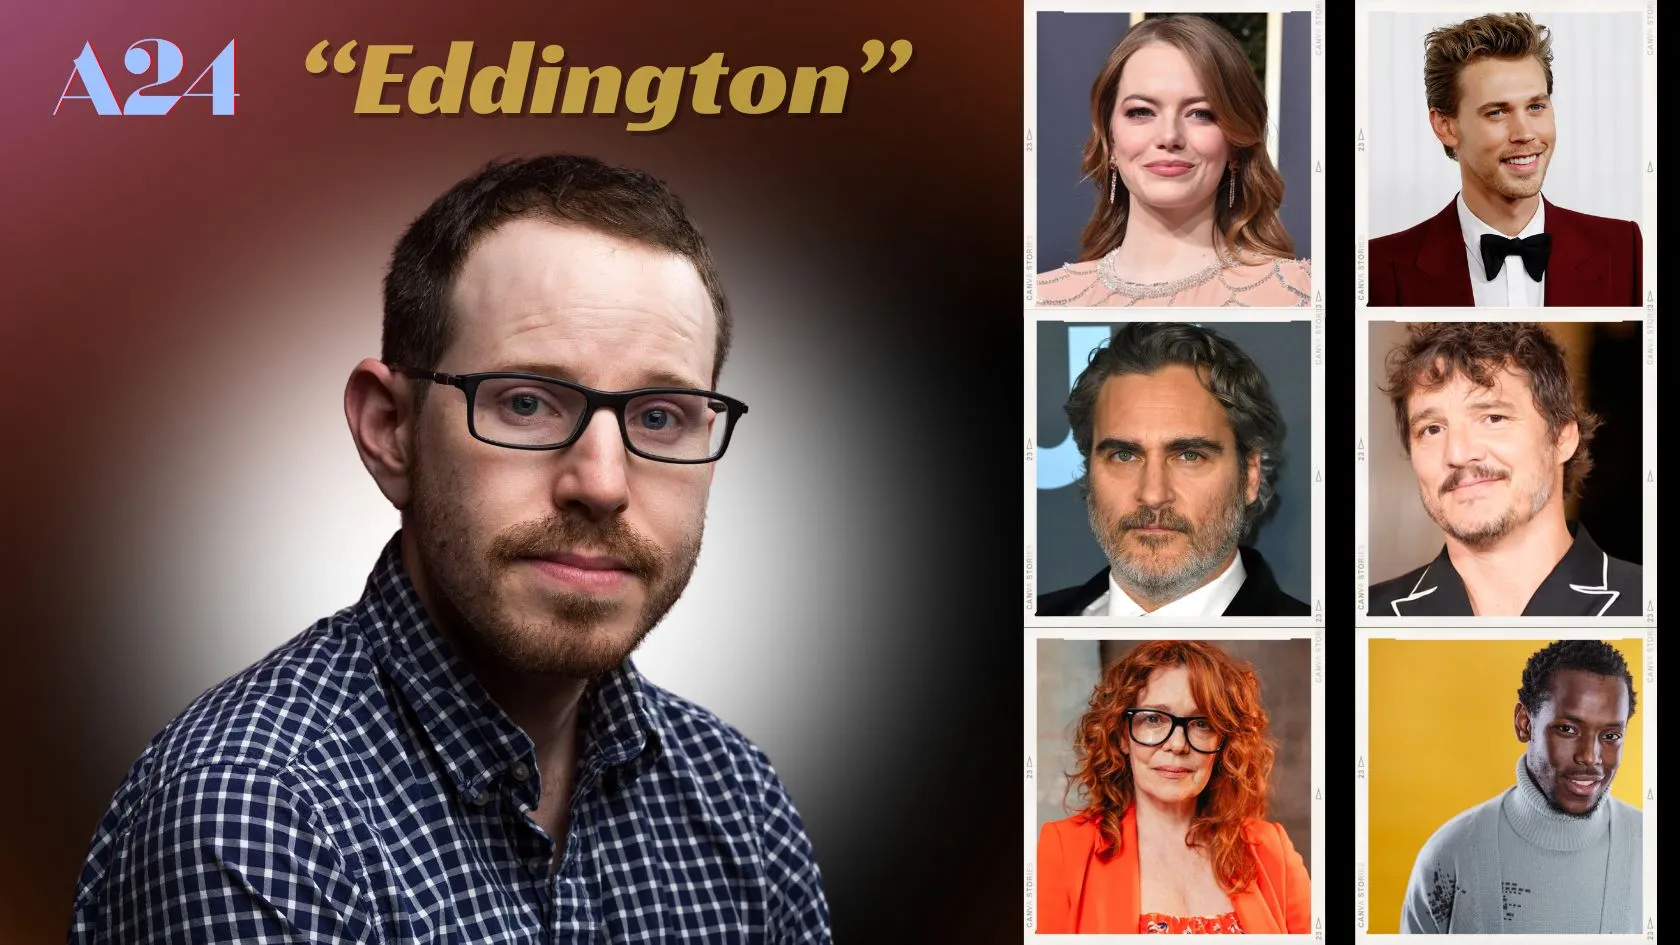 Aster's Eddington Starts Filming with A-List Cast Members